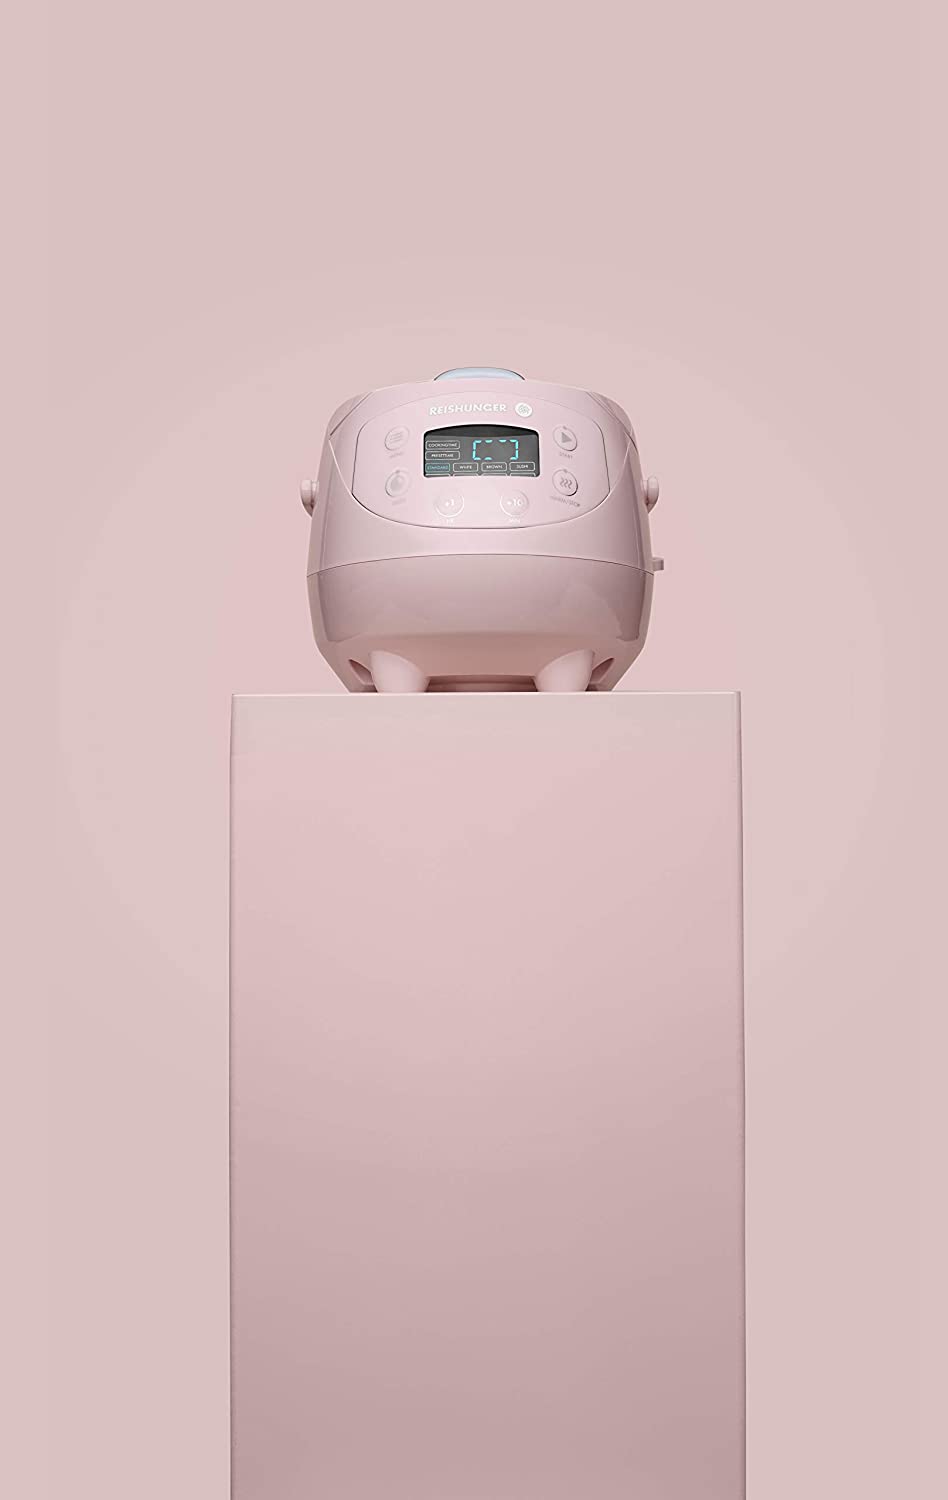 Reishunger Digital Mini Rice Cooker & Steamer, Pink with Keep-Warm Function & Timer - 35 Cups - Small Rice Cooker Japanese Style